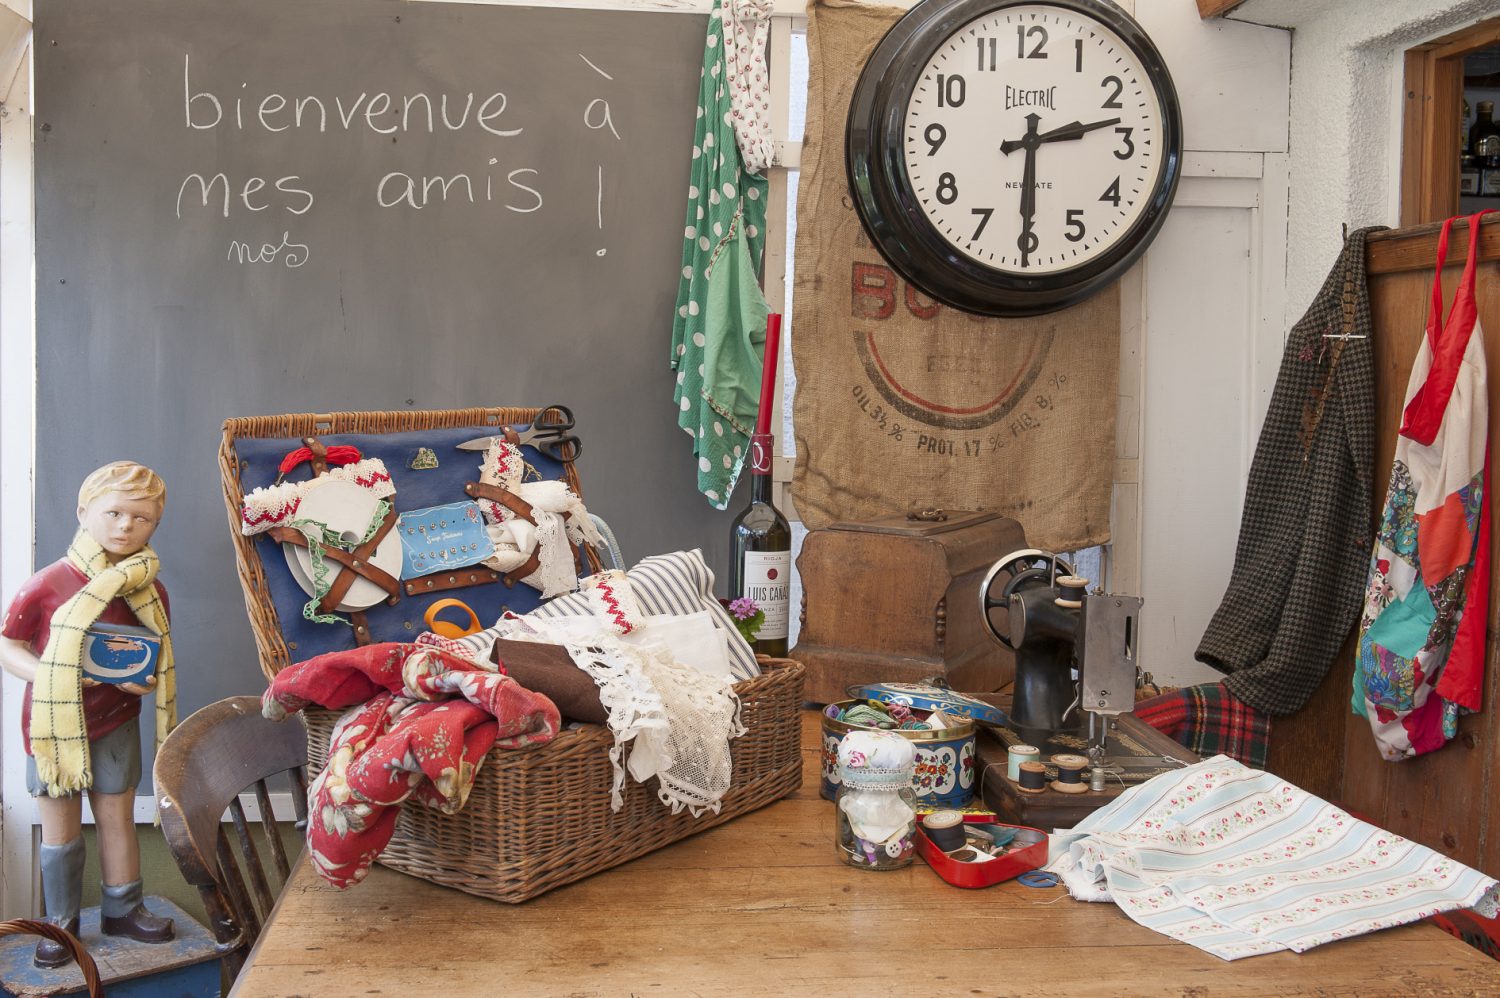 Having moved from a significantly larger property, every inch of space has been put to good use as a convenient way for Pippa to display and store neatly arranged clusters of trinkets and finds from her travels in France